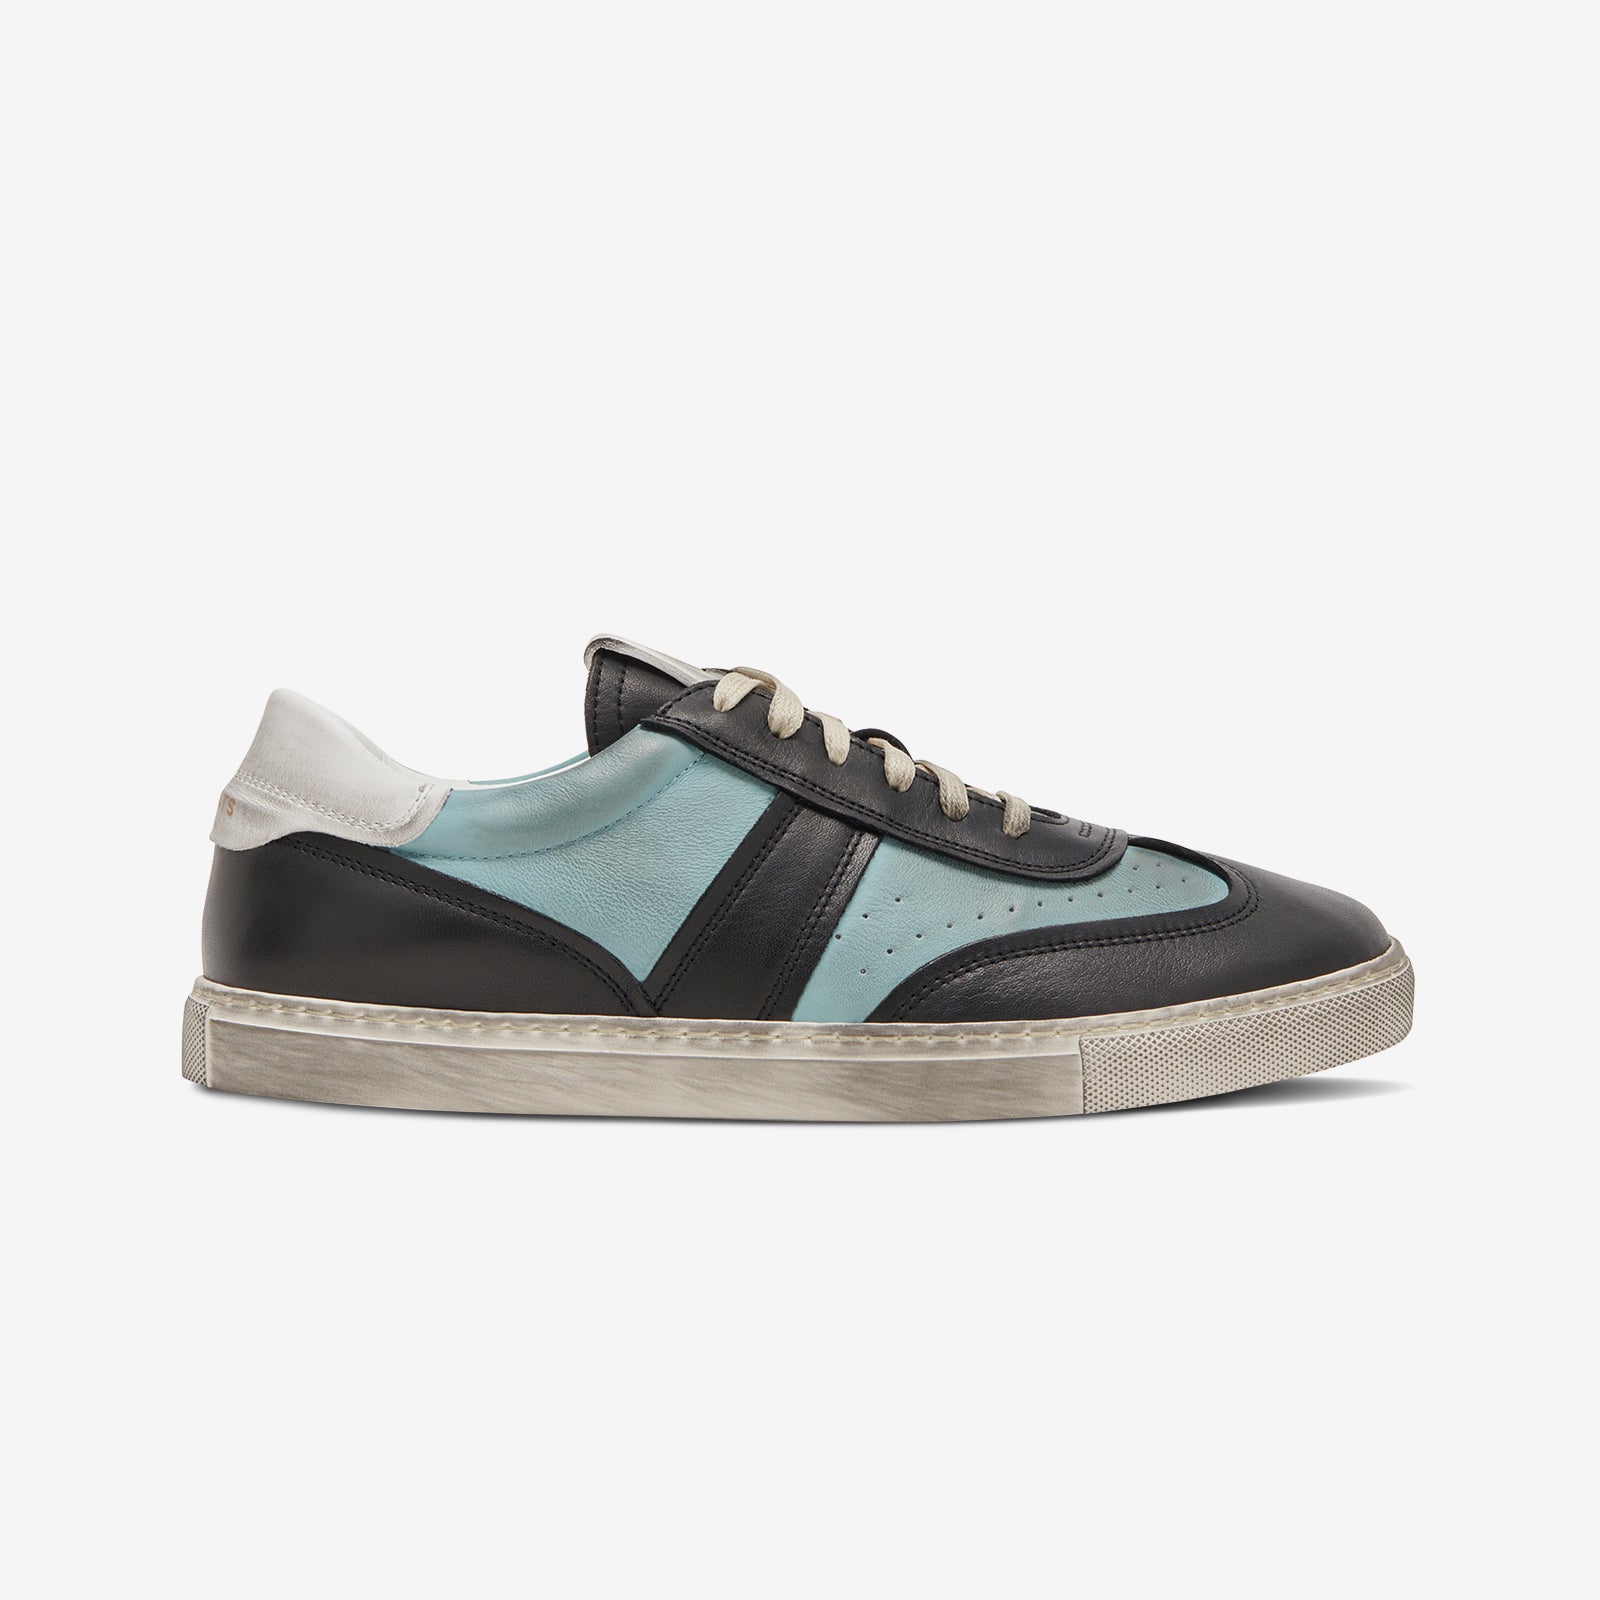 Greats - The Charlie Distressed - Blue Multi - Women's Shoe – GREATS